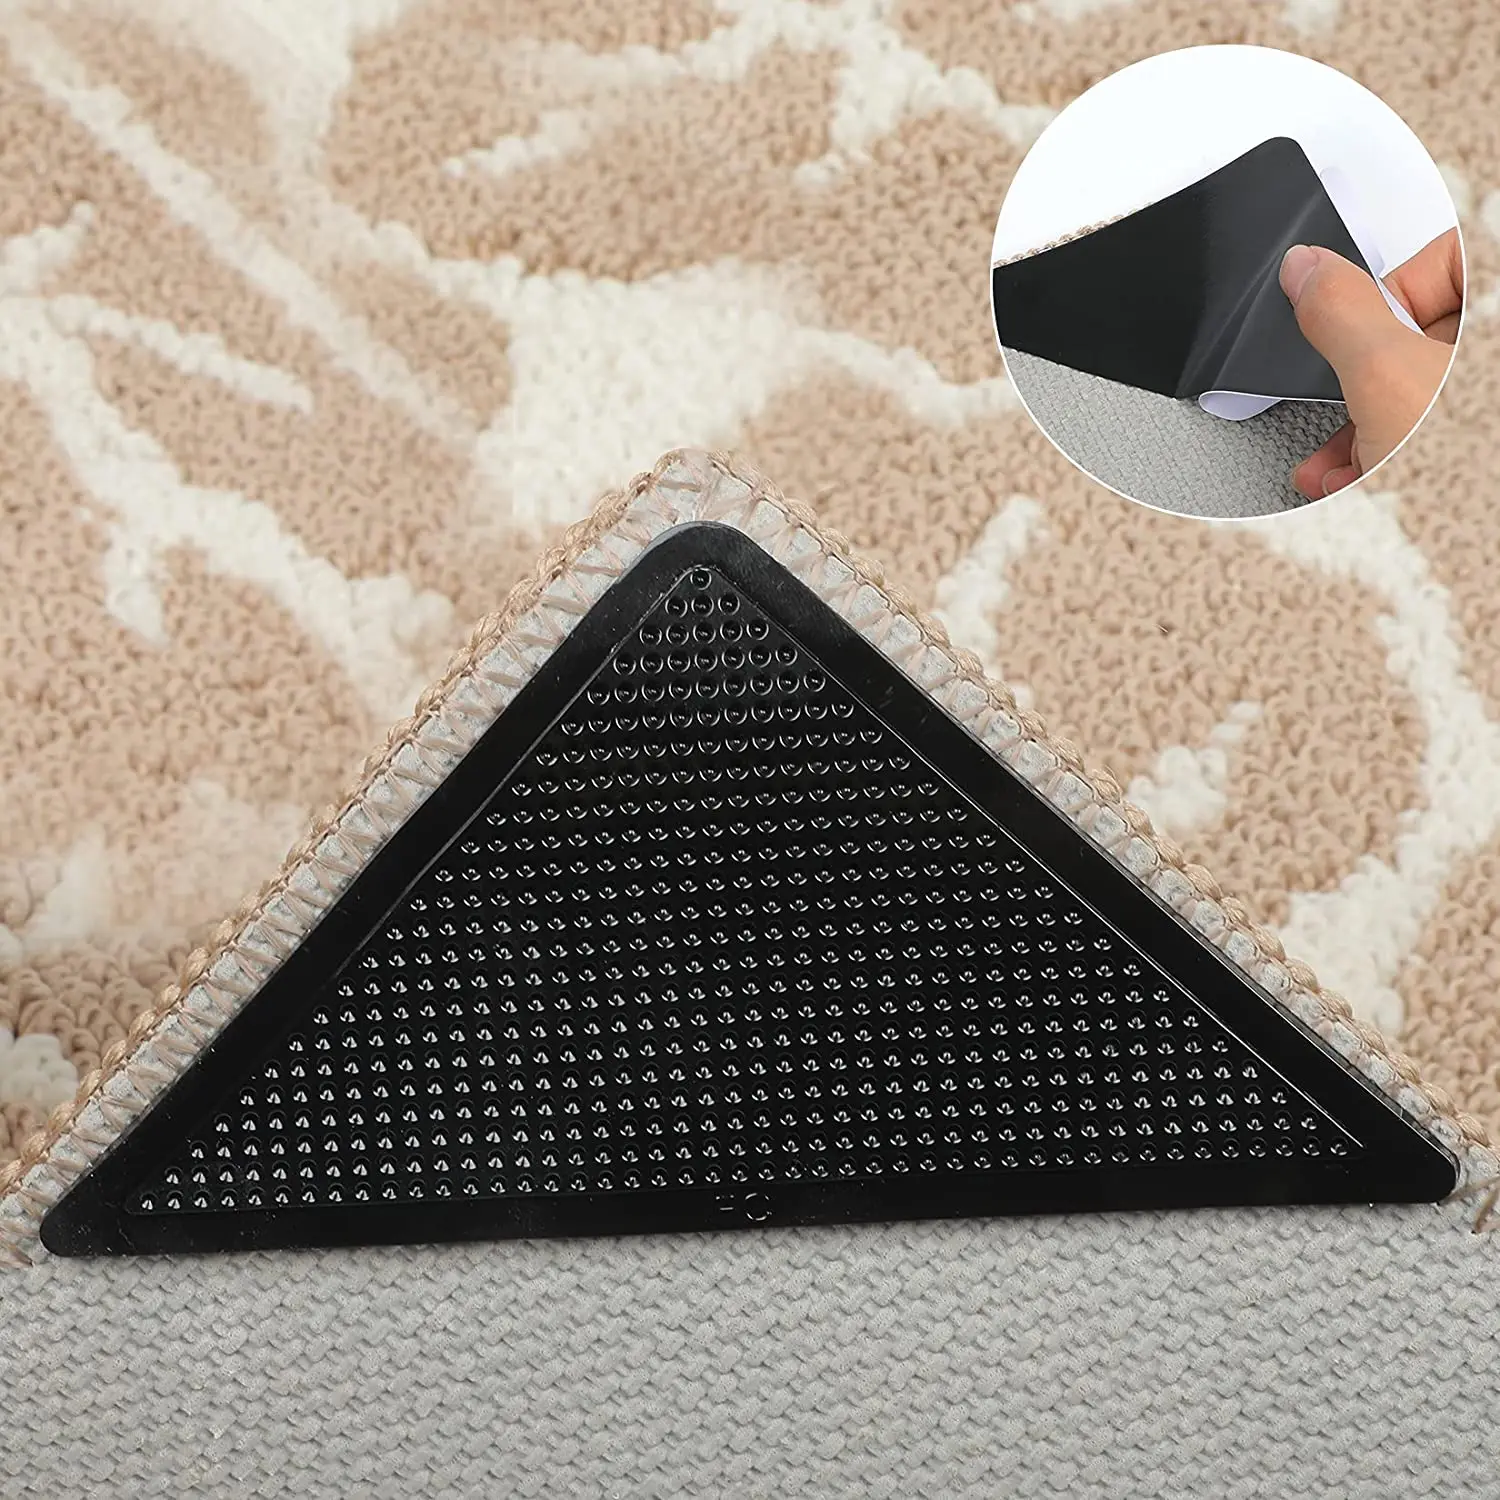 Rug Gripper,4 PCS Rug Grippers for Area Rugs,Non Slip Rug Grippers for  Hardwood Floors,Anti Slip Carpet Pads for Tile/Wood Floor,Area Stickers Rugs  Grips Stoppers to Prevent Curling. 